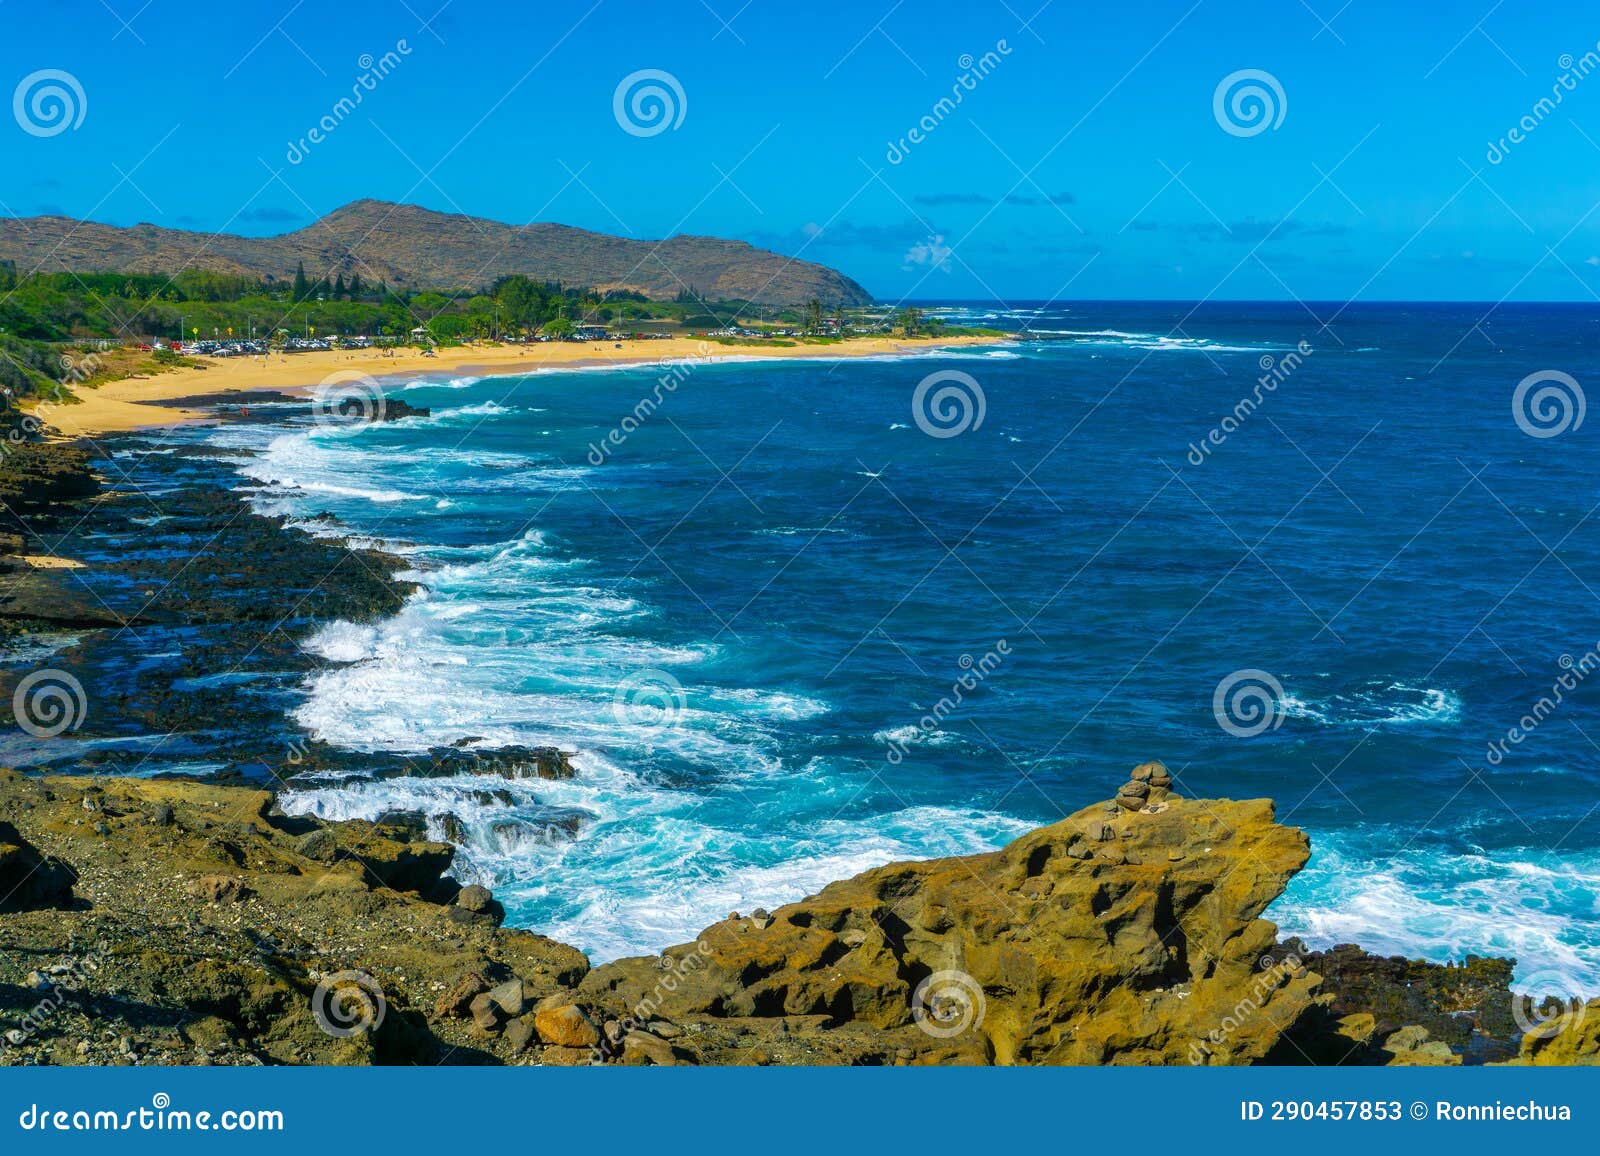 Sandy Beach On The South Shore Of Oahu In Hawaii Stock Image Image Of Leisure Waves 290457853